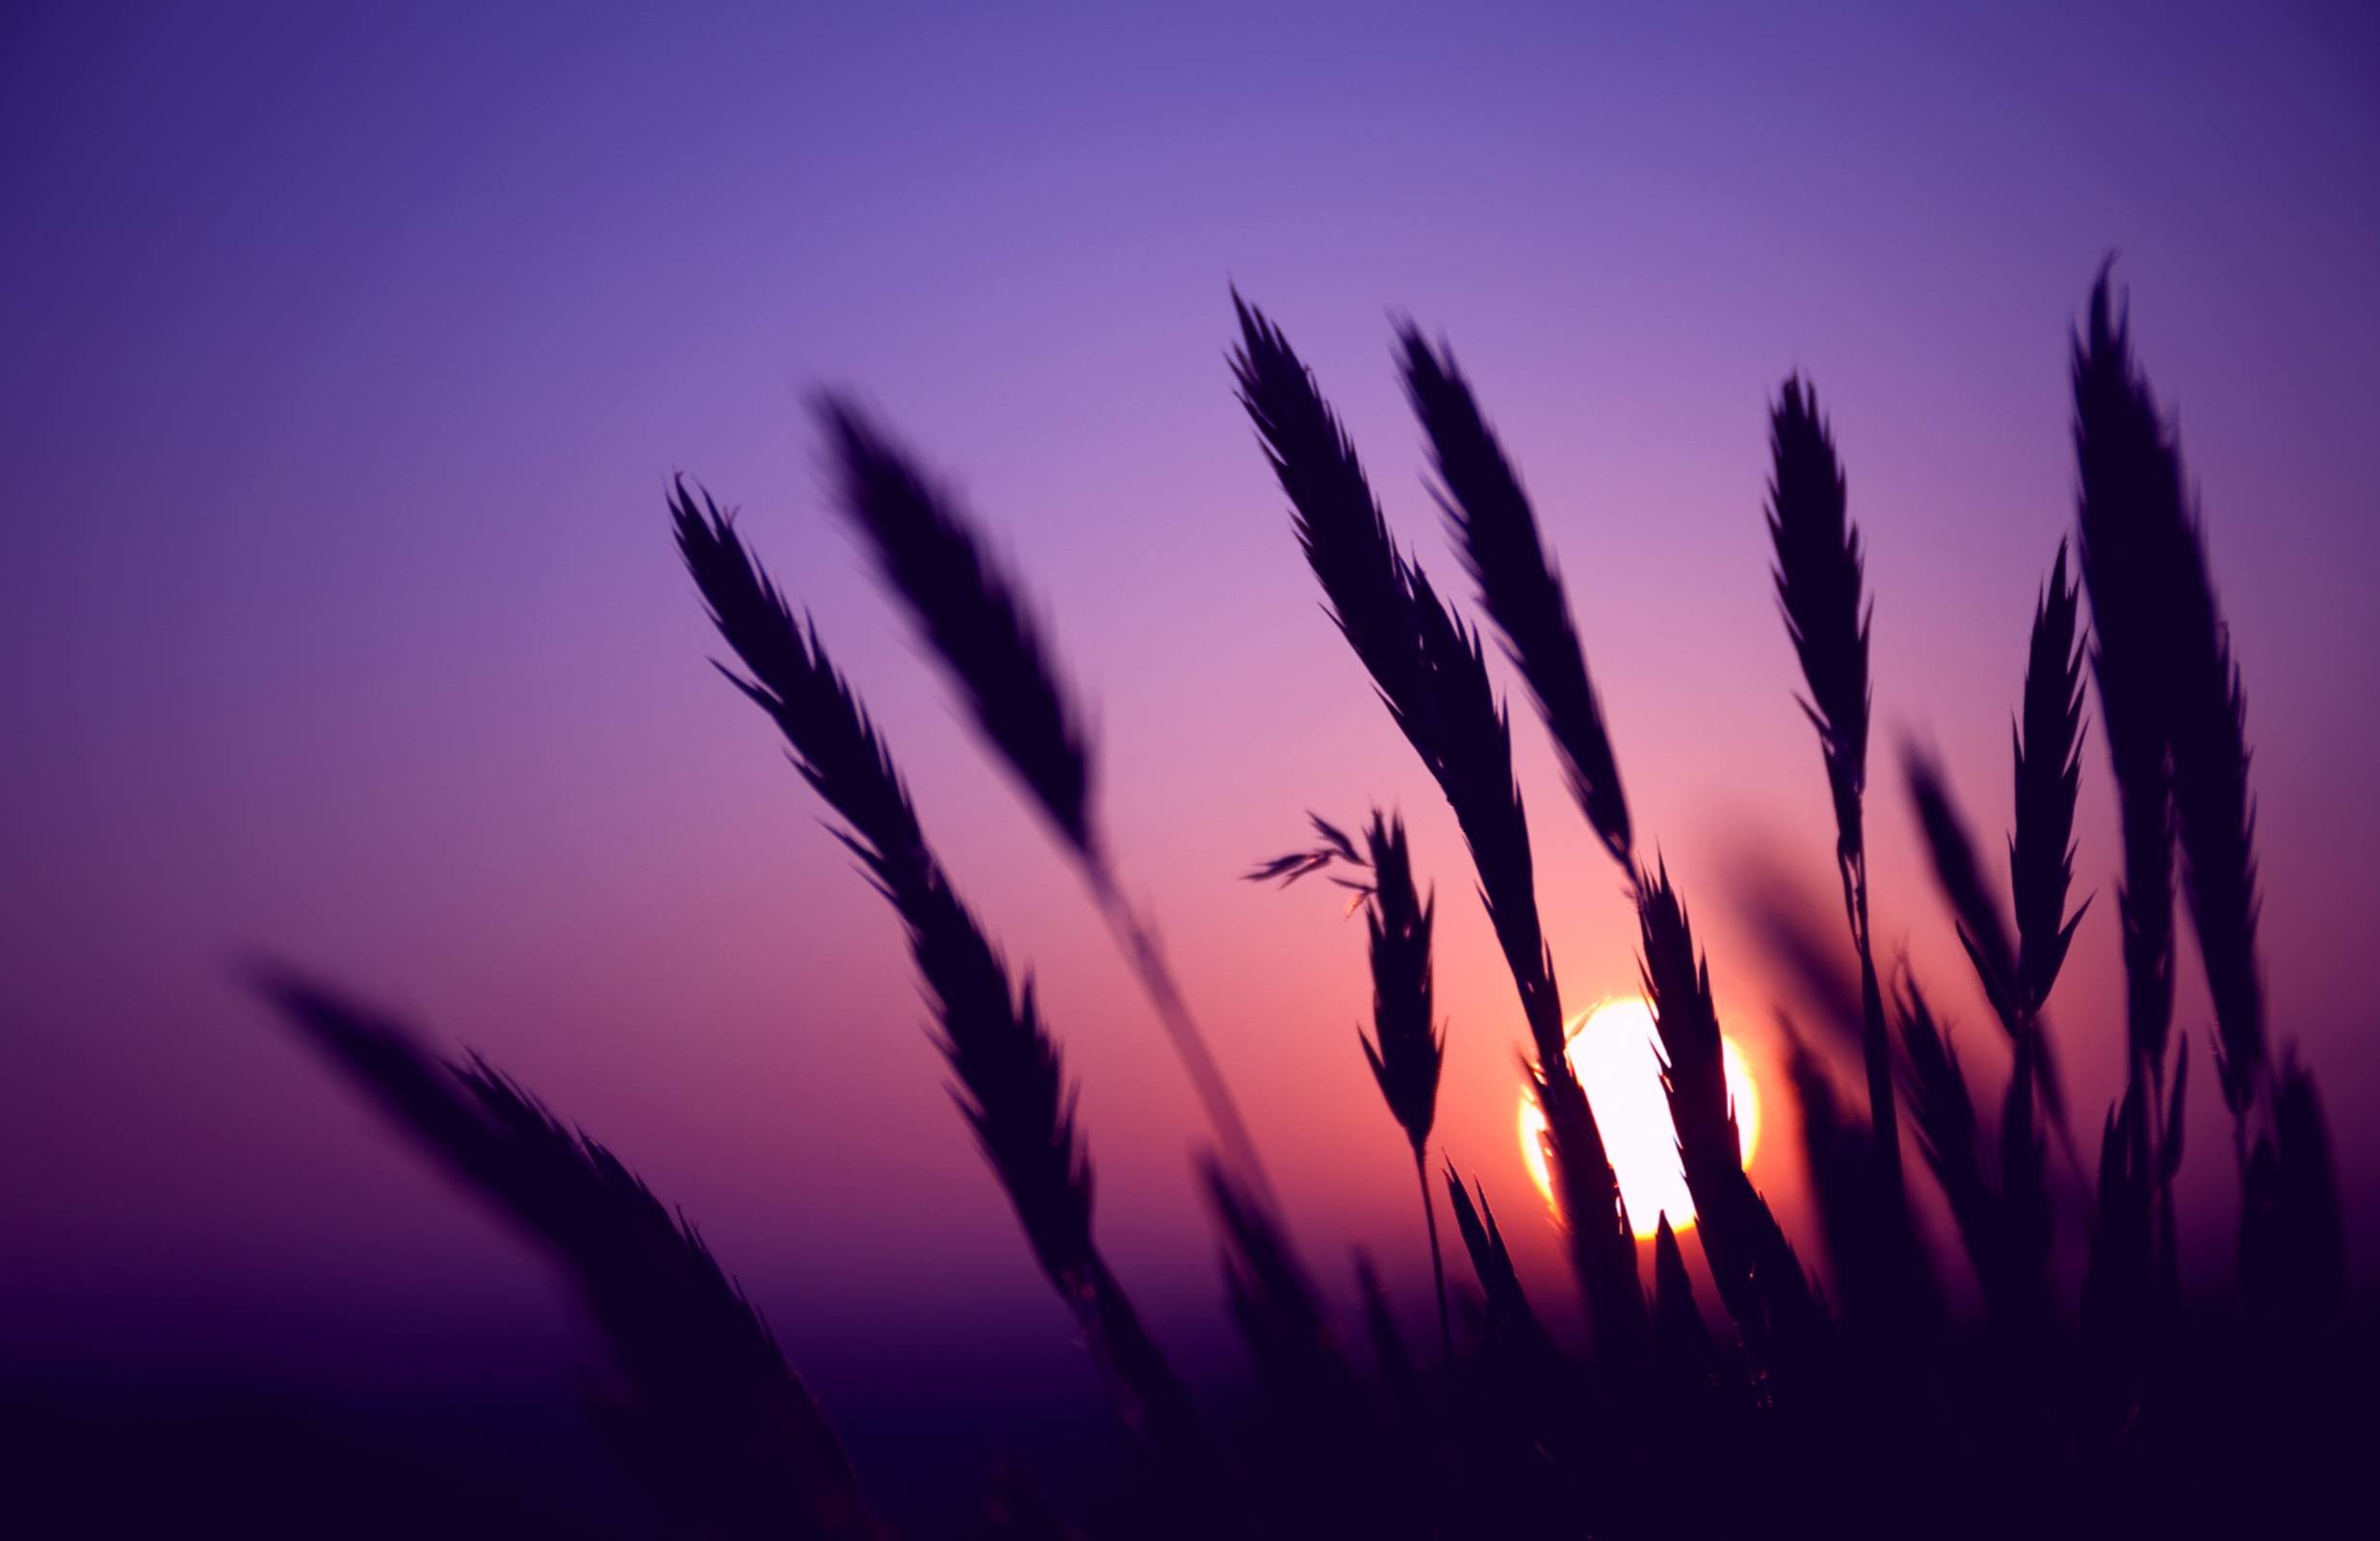 2471x1600 Wallpapers For > Purple Sunset Wallpapers